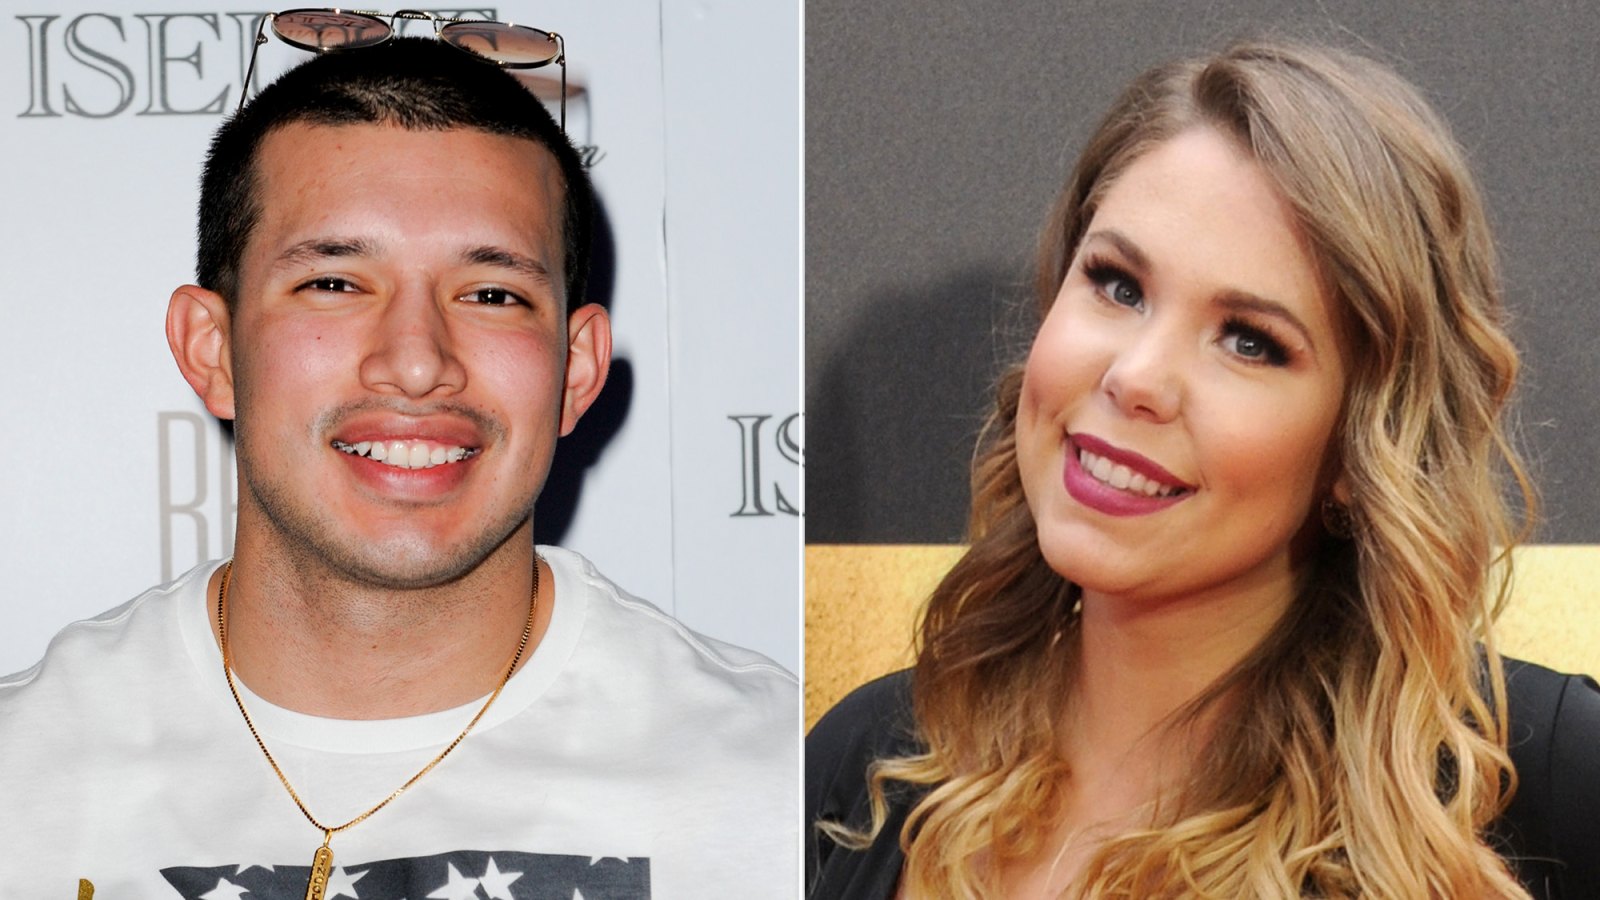 Javi Marroquin and Kailyn Lowry